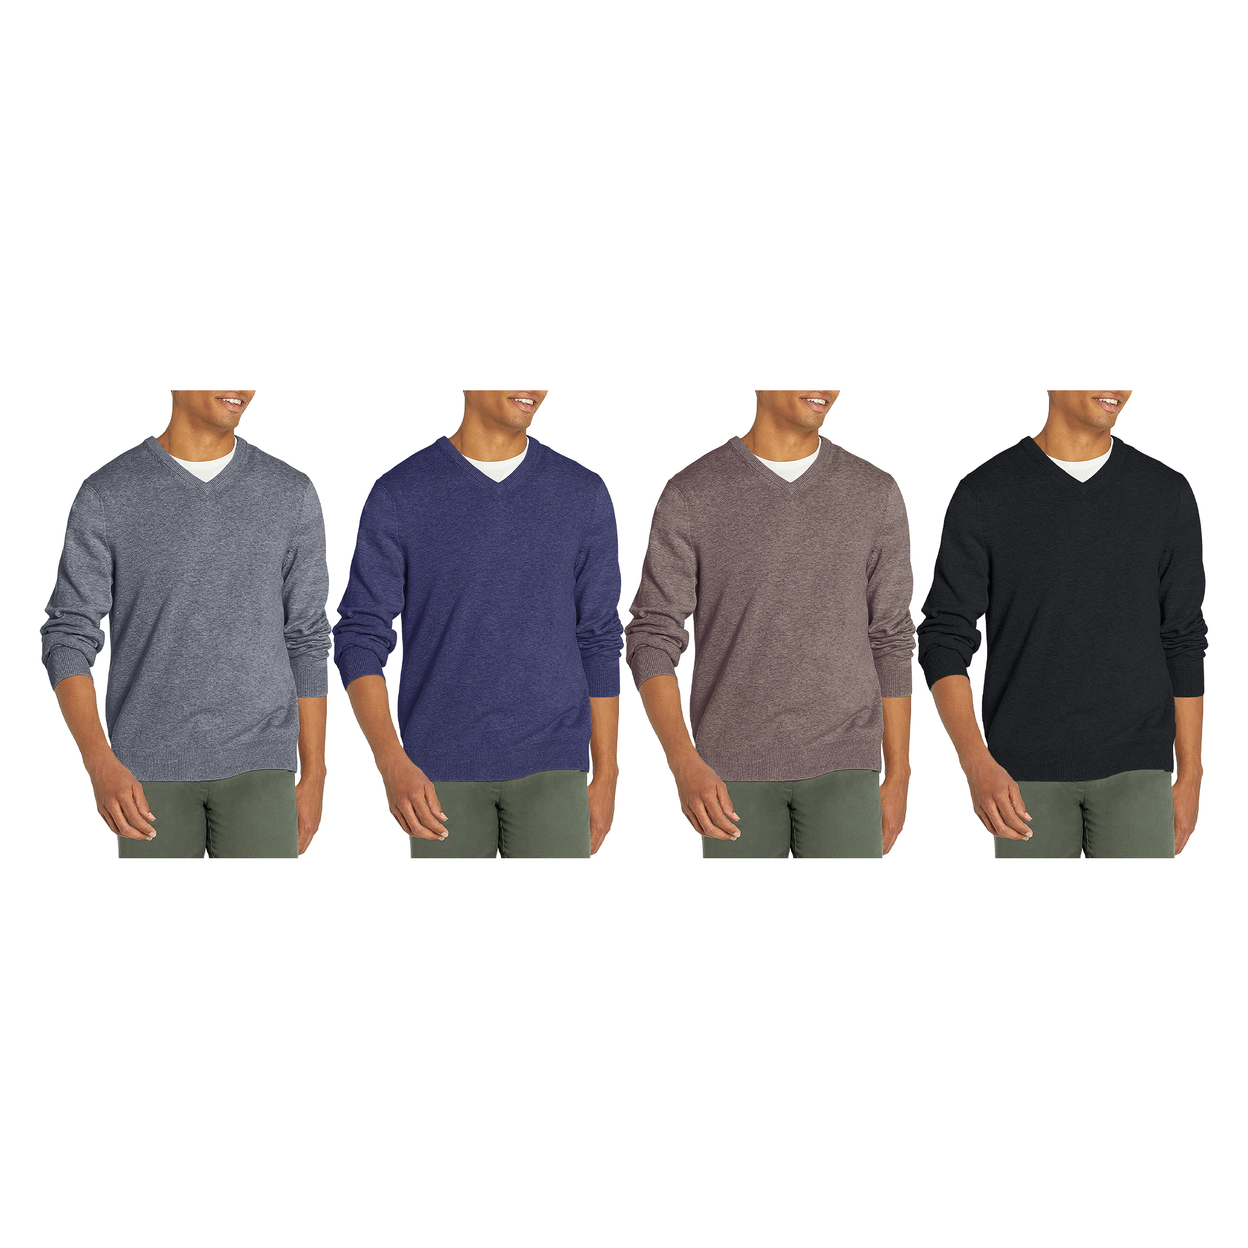 2-Pack: Men's Casual Ultra Soft Slim Fit Warm Knit V-Neck Sweater - Black & Brown, Xx-large